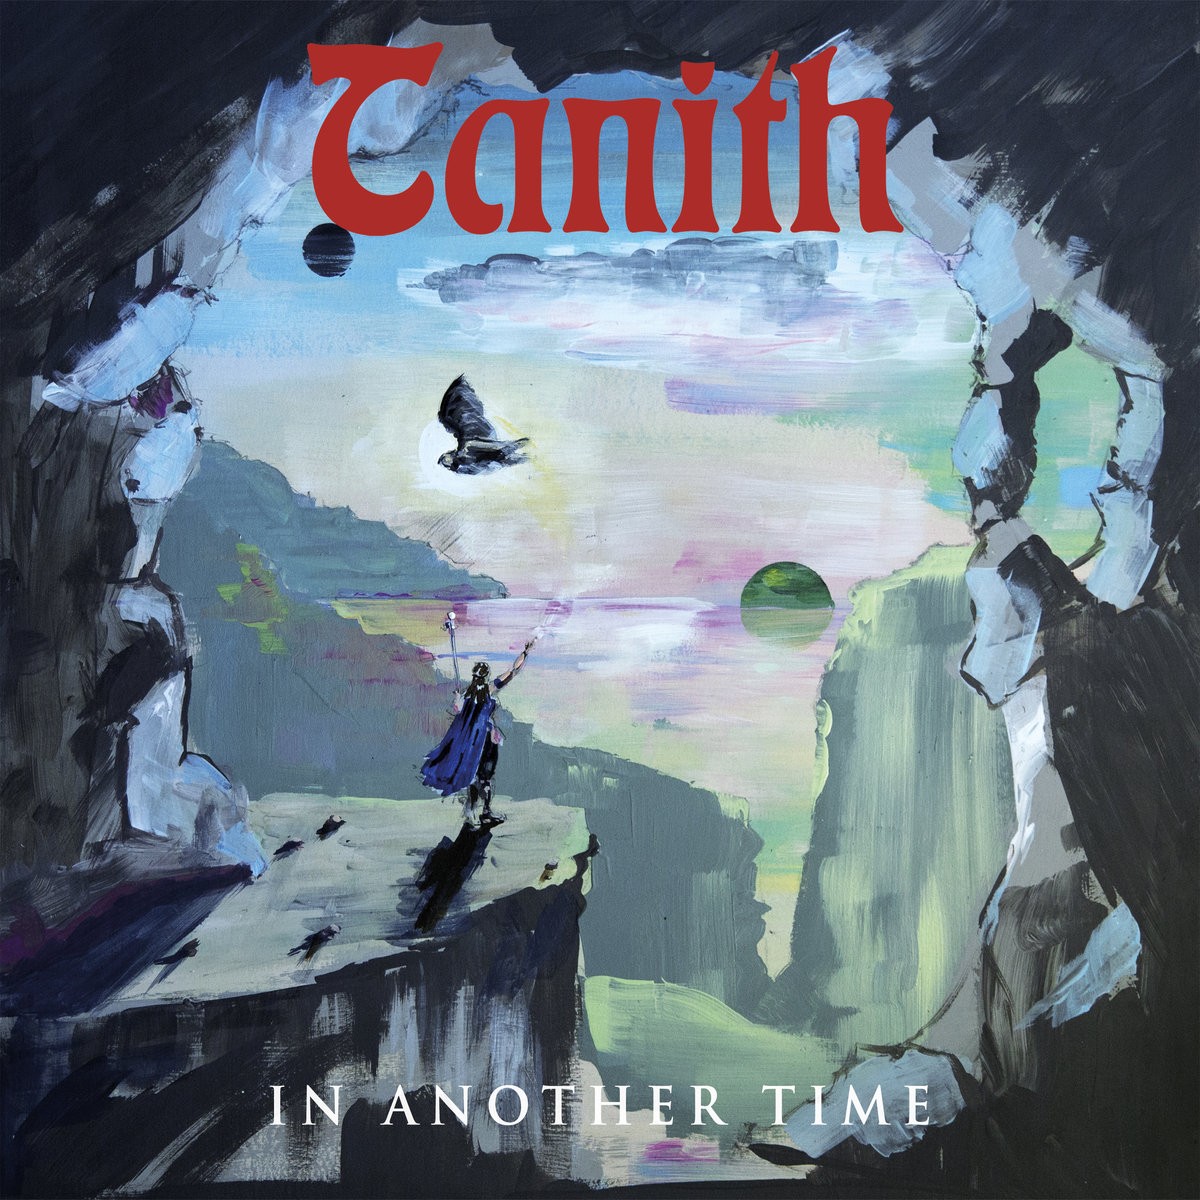 Tanith - In Another Time (2019) Cover